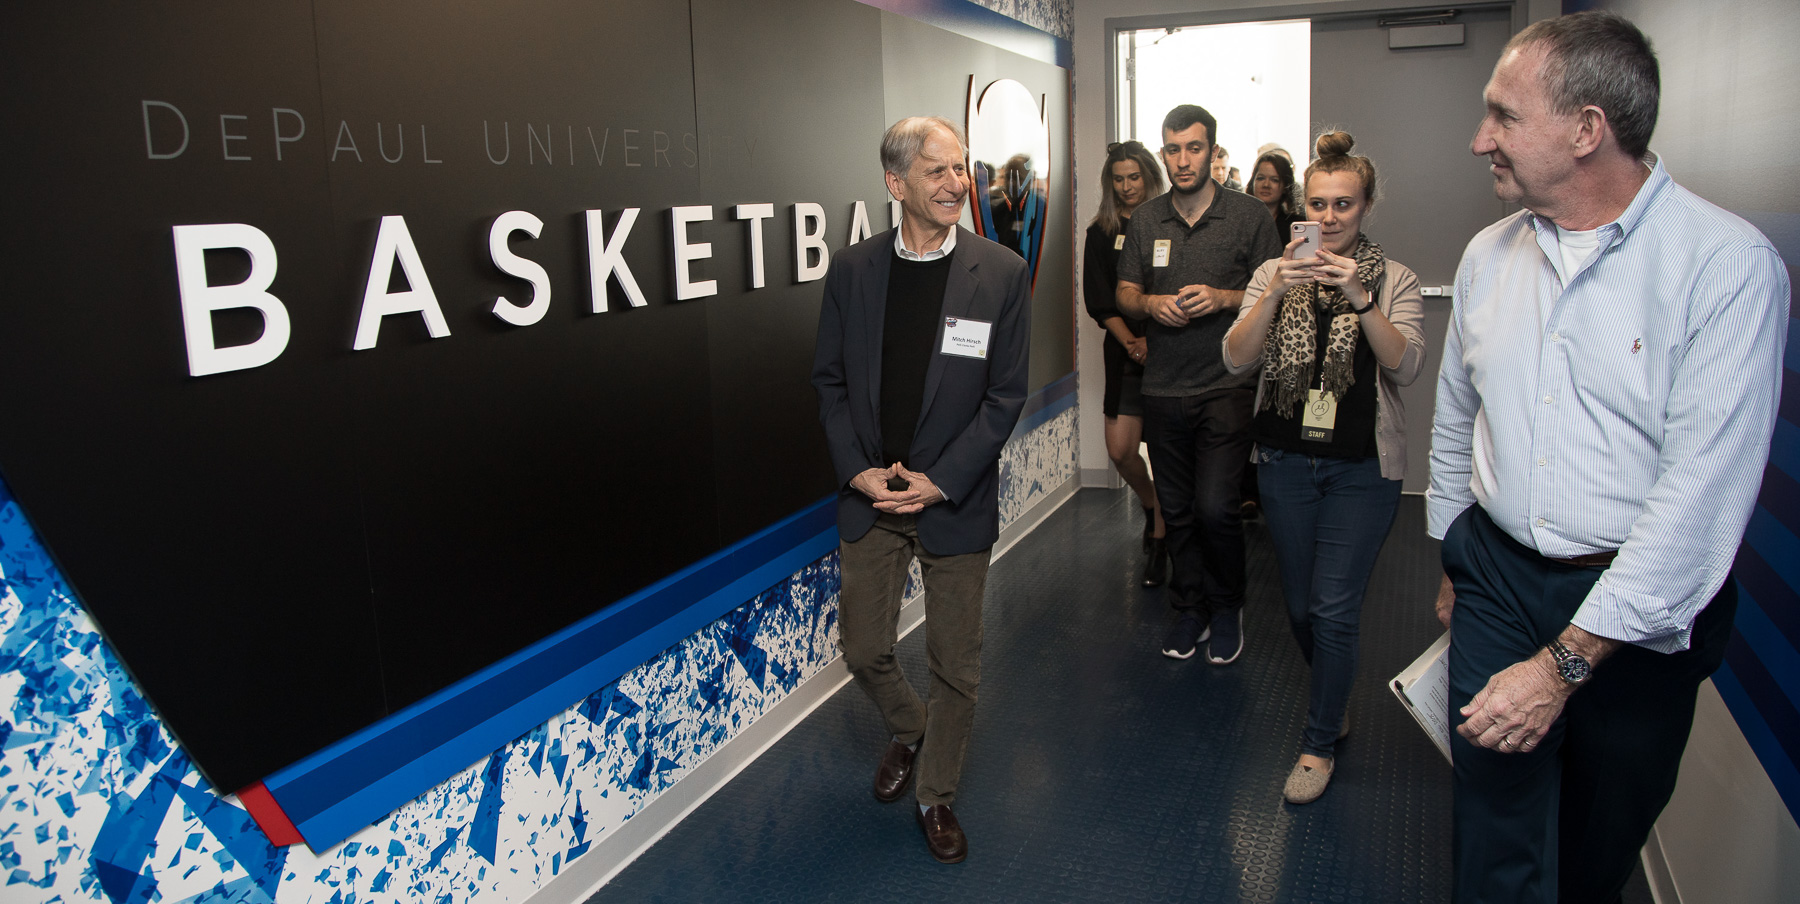 Mitchell Hirsch, principal architect for Pelli Clarke Pelli Architects, left, and Bob Janis, vice president of facility operations, lead attendees into DePaul's basketball suite. (DePaul University/Jeff Carrion)